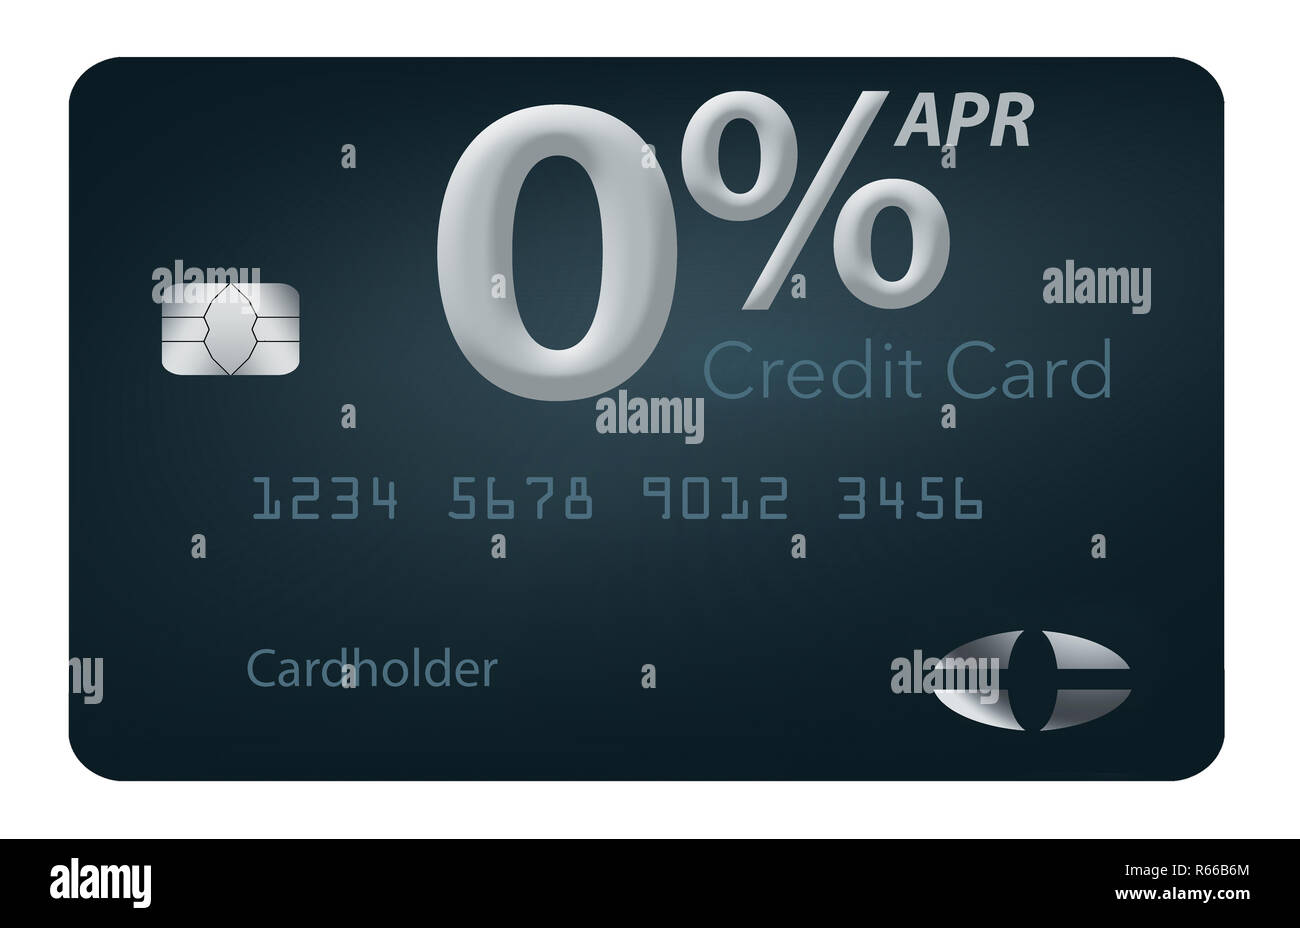 Many credit card offers now include zero percent annual percentage rate for 12-15 months and this generic mock card illustrates these offers. This is  Stock Photo